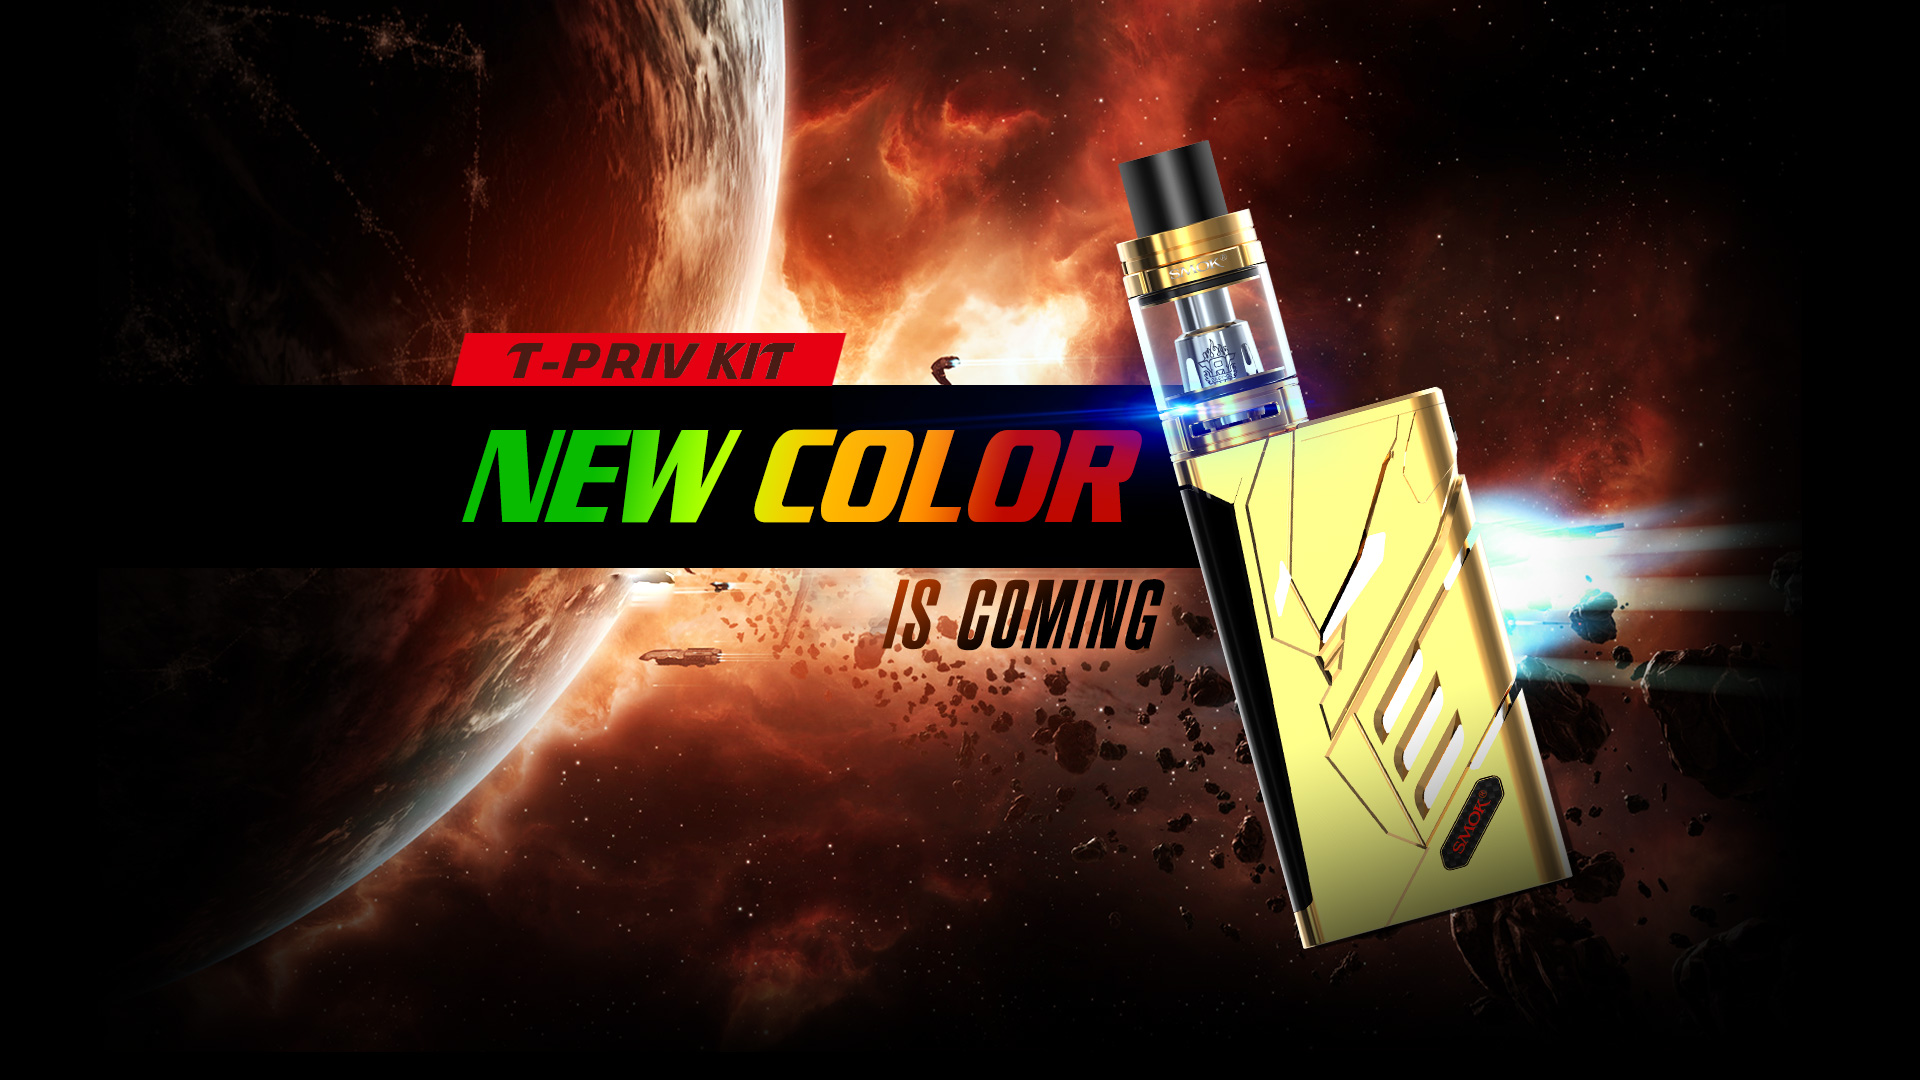 New SMOK T-PRIV Kit Color is Coming